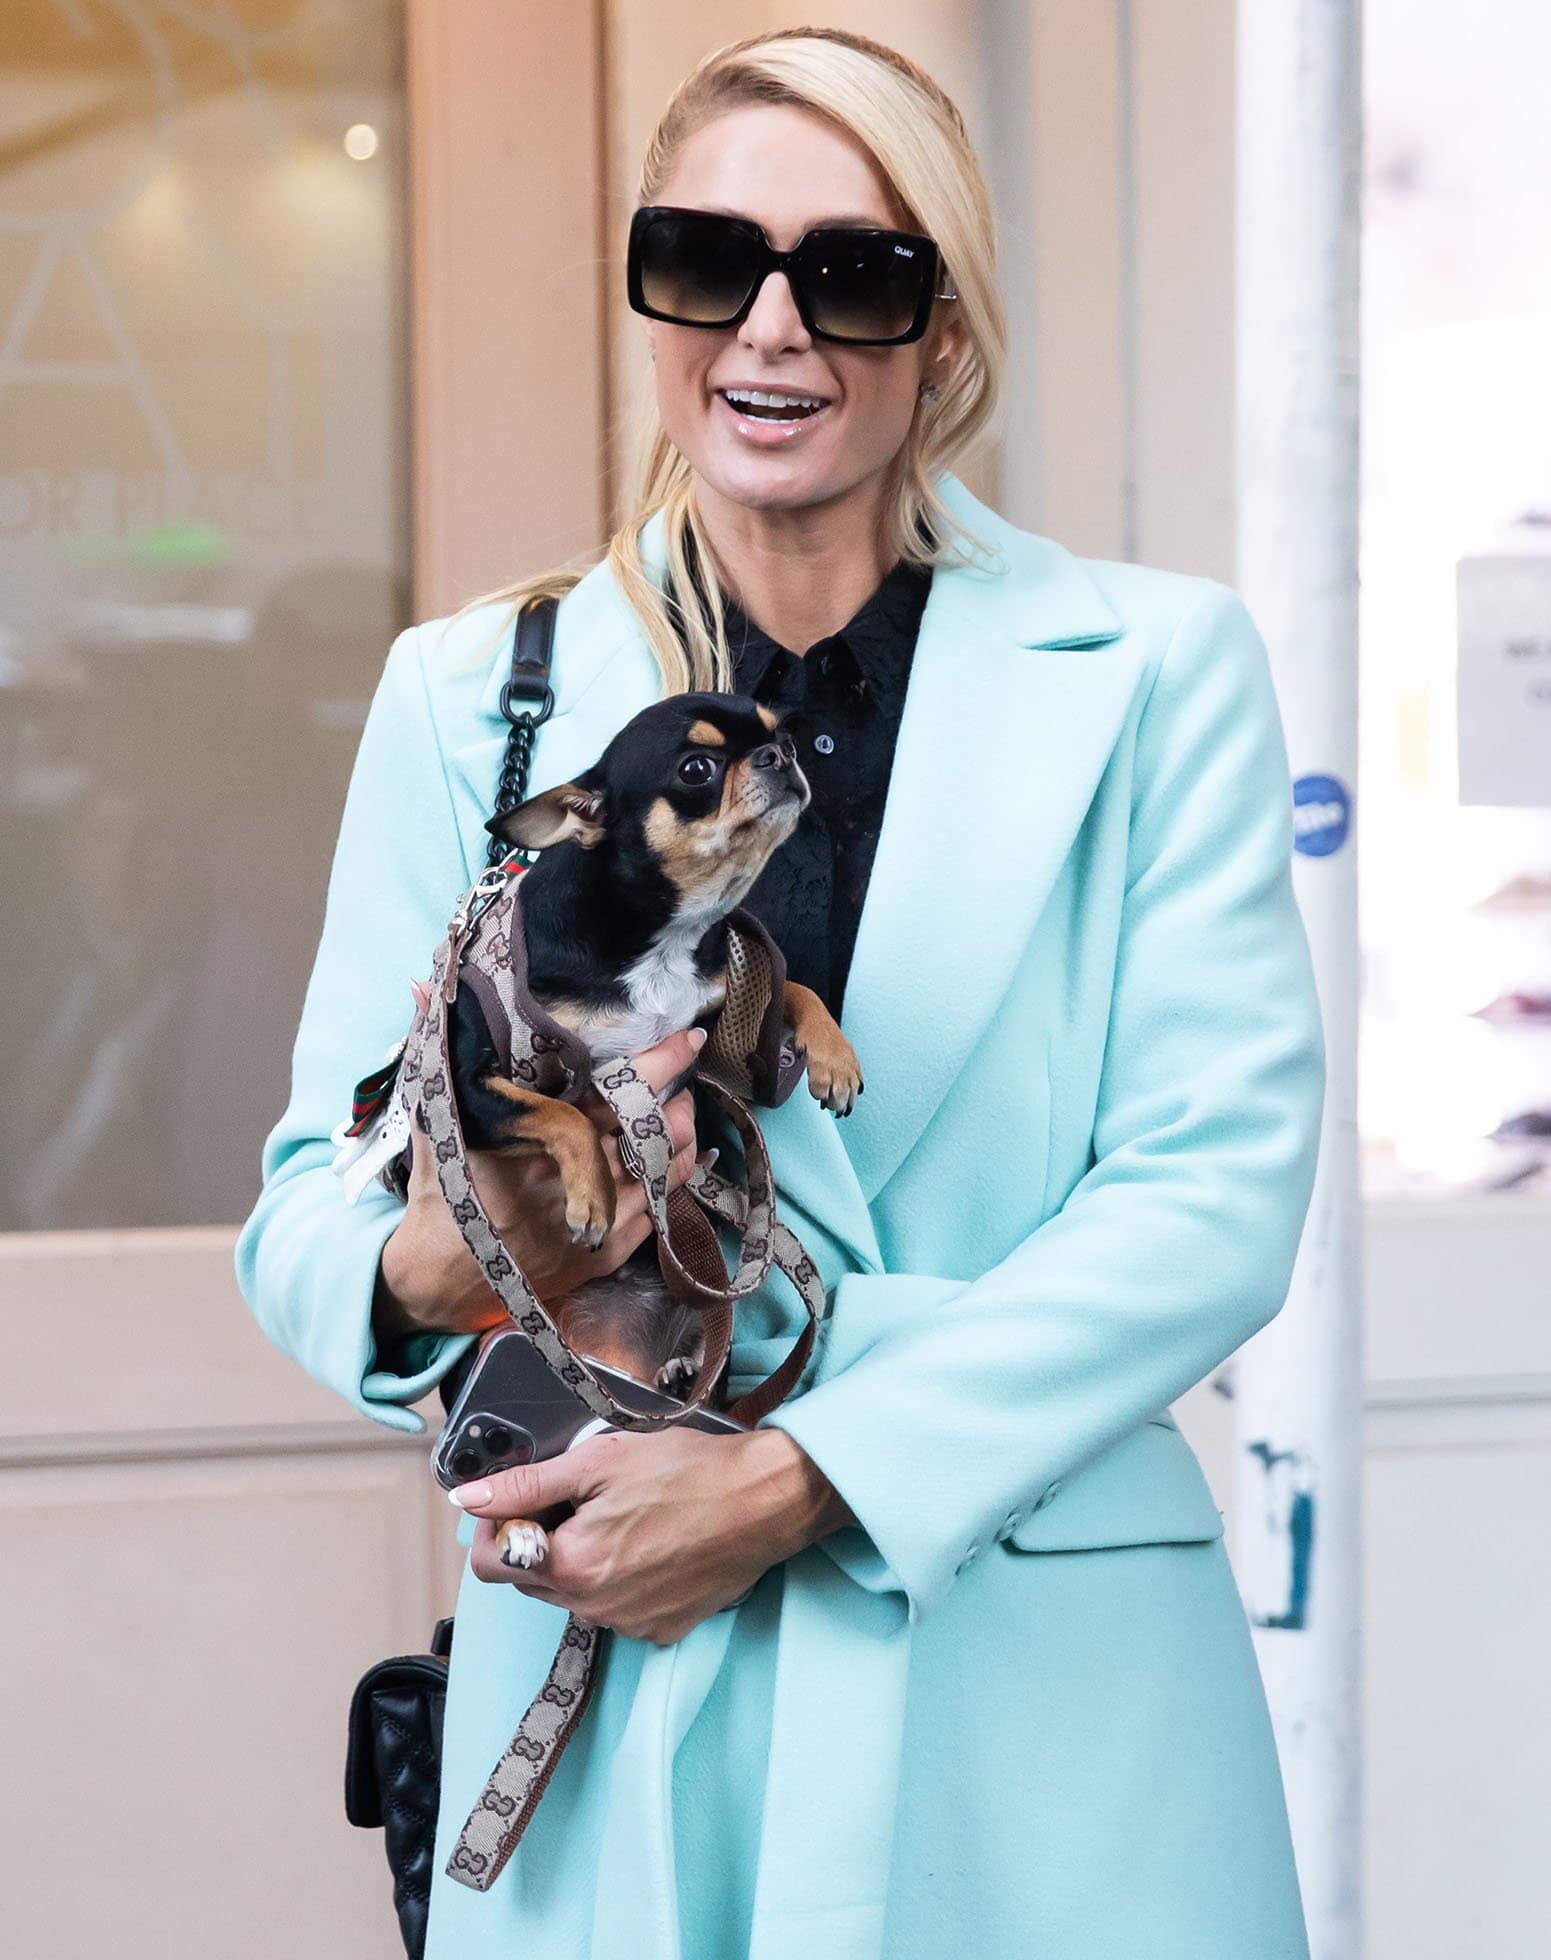 Paris Hilton flashing her pearly whites while carrying her teacup chihuahua, Diamond Baby